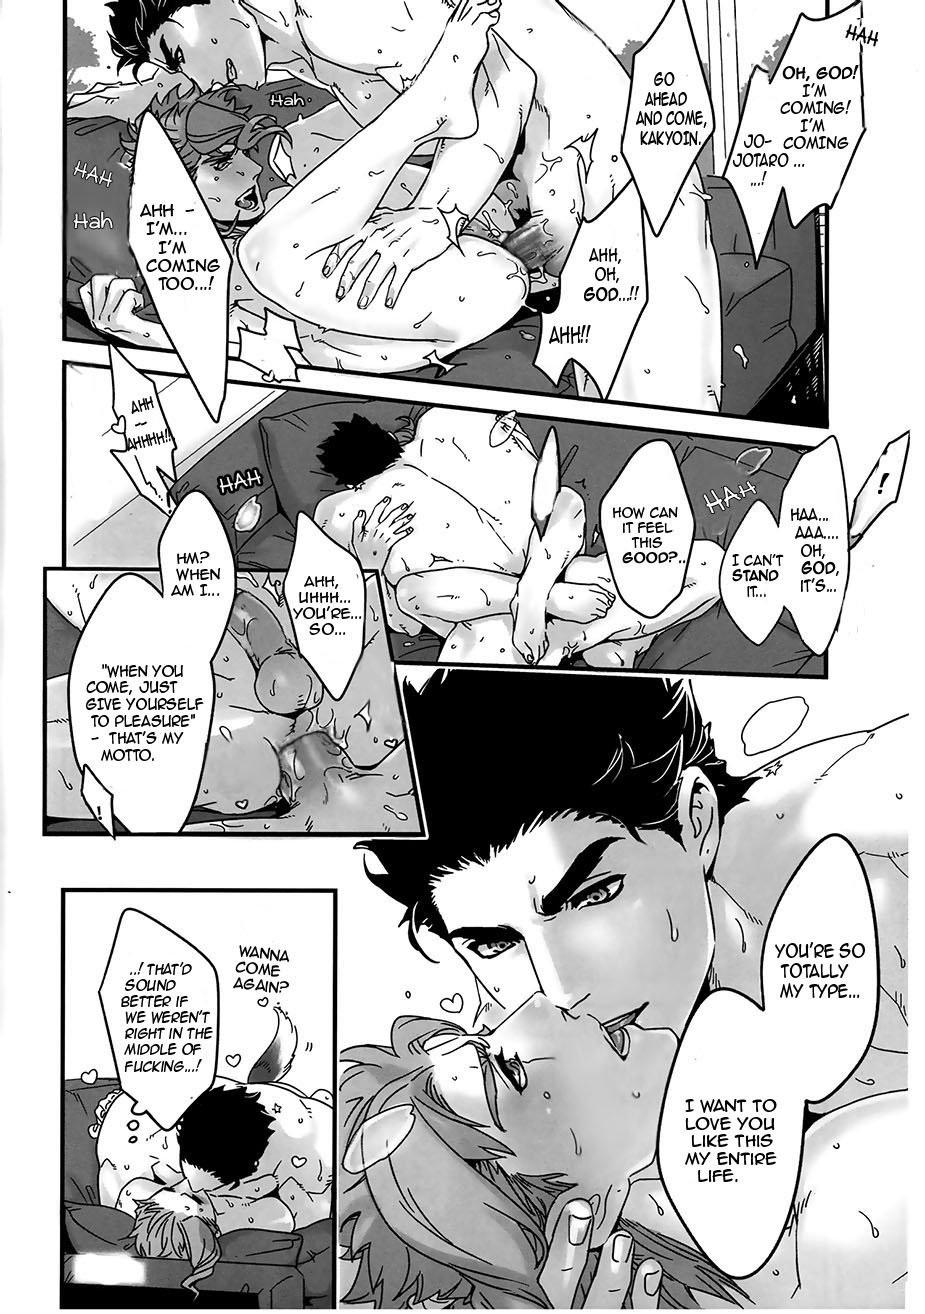 Submission Doushitsuji, Yaya Issen o Koete Shimatta Senyu to Koibito Doushi ni naru Houhou | How We Kind of Crossed a Line When We Shared a Room and Turned from Comrades to Lovers - Jojos bizarre adventure Sex Toys - Page 31